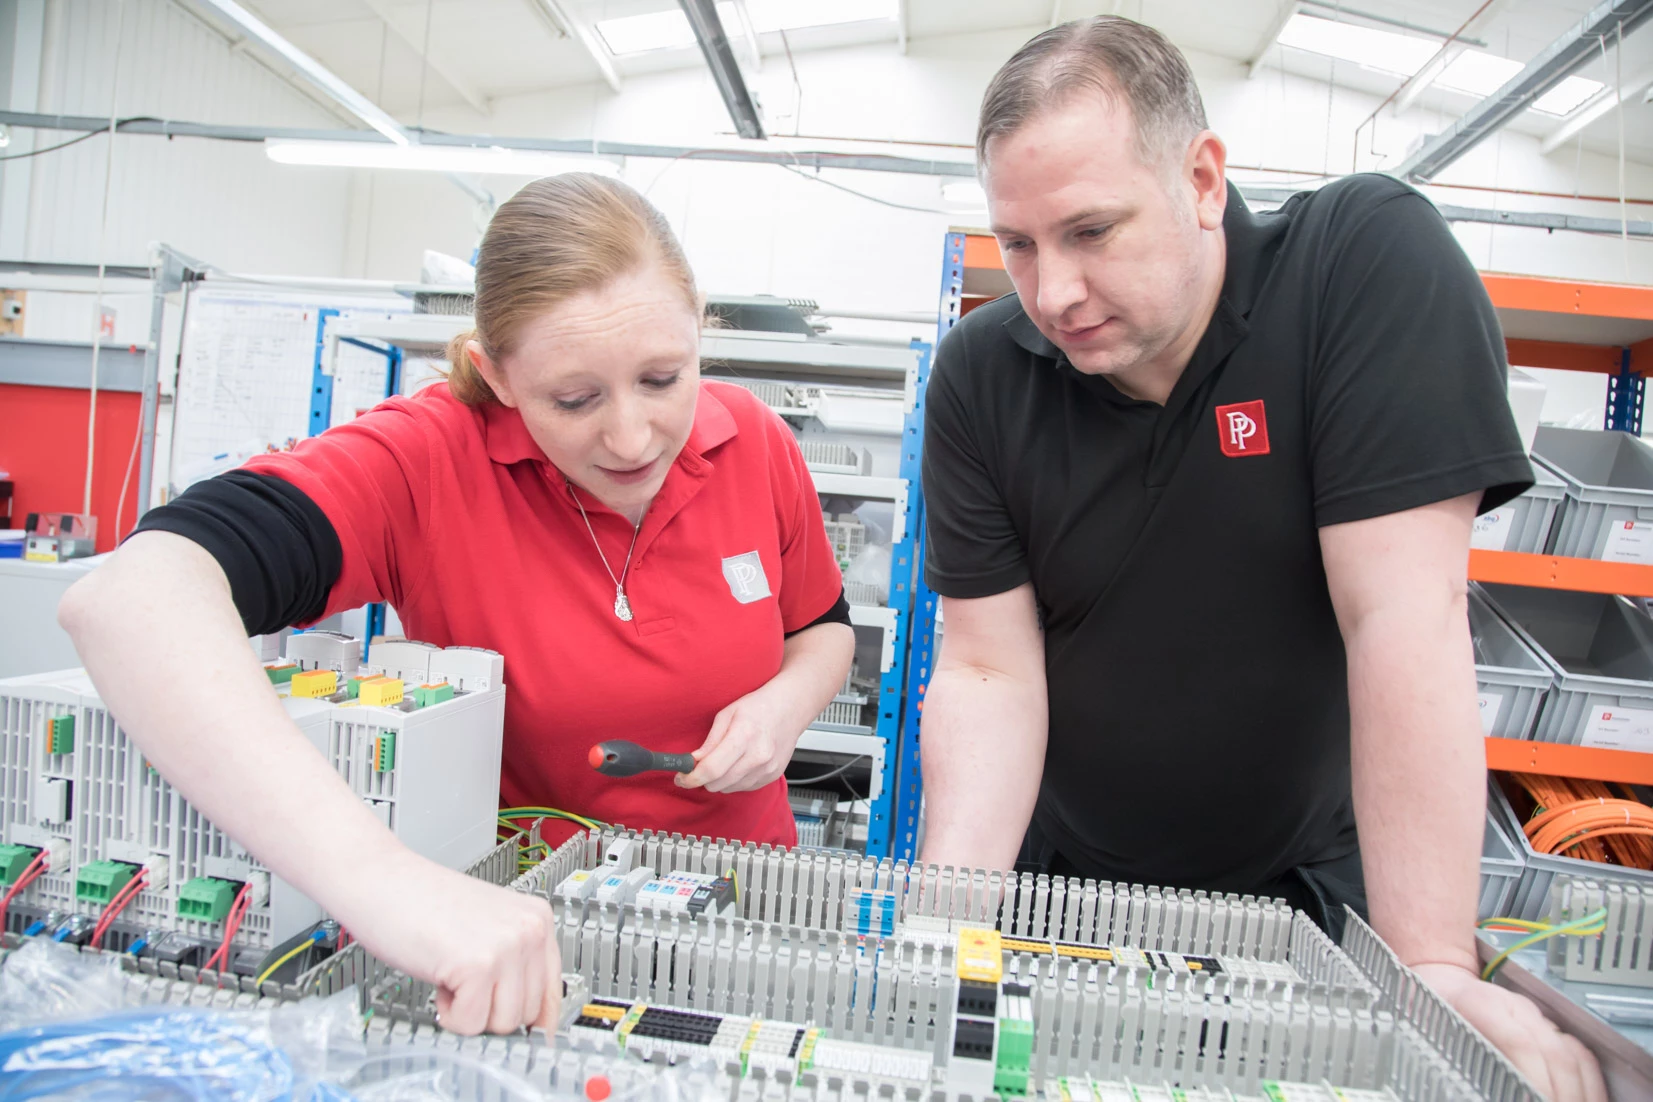 Staff provided an insight into the PP Control & Automation culture 